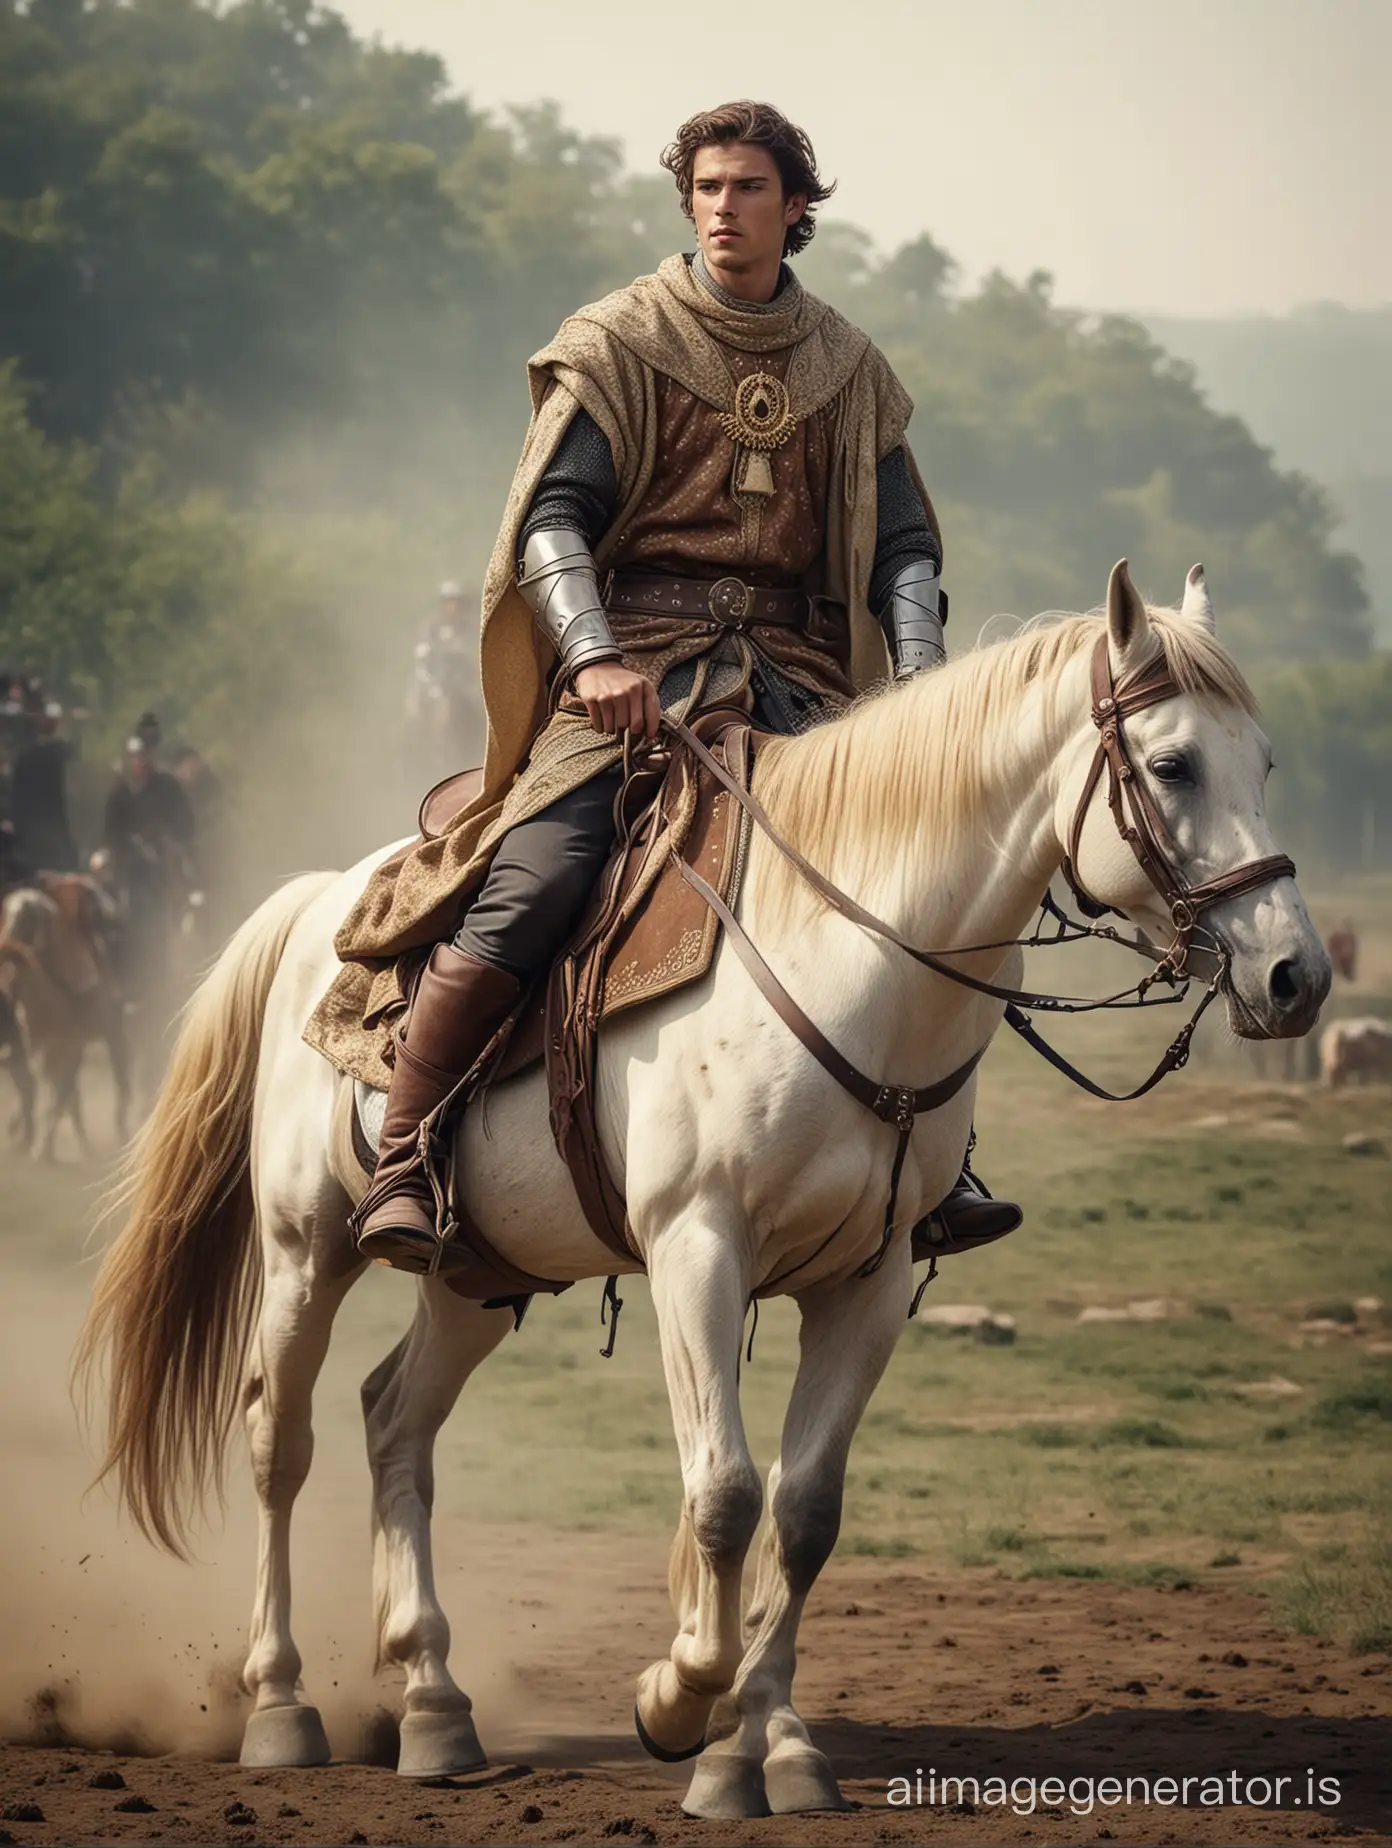 Young-Western-Feudal-Lord-Riding-Horse